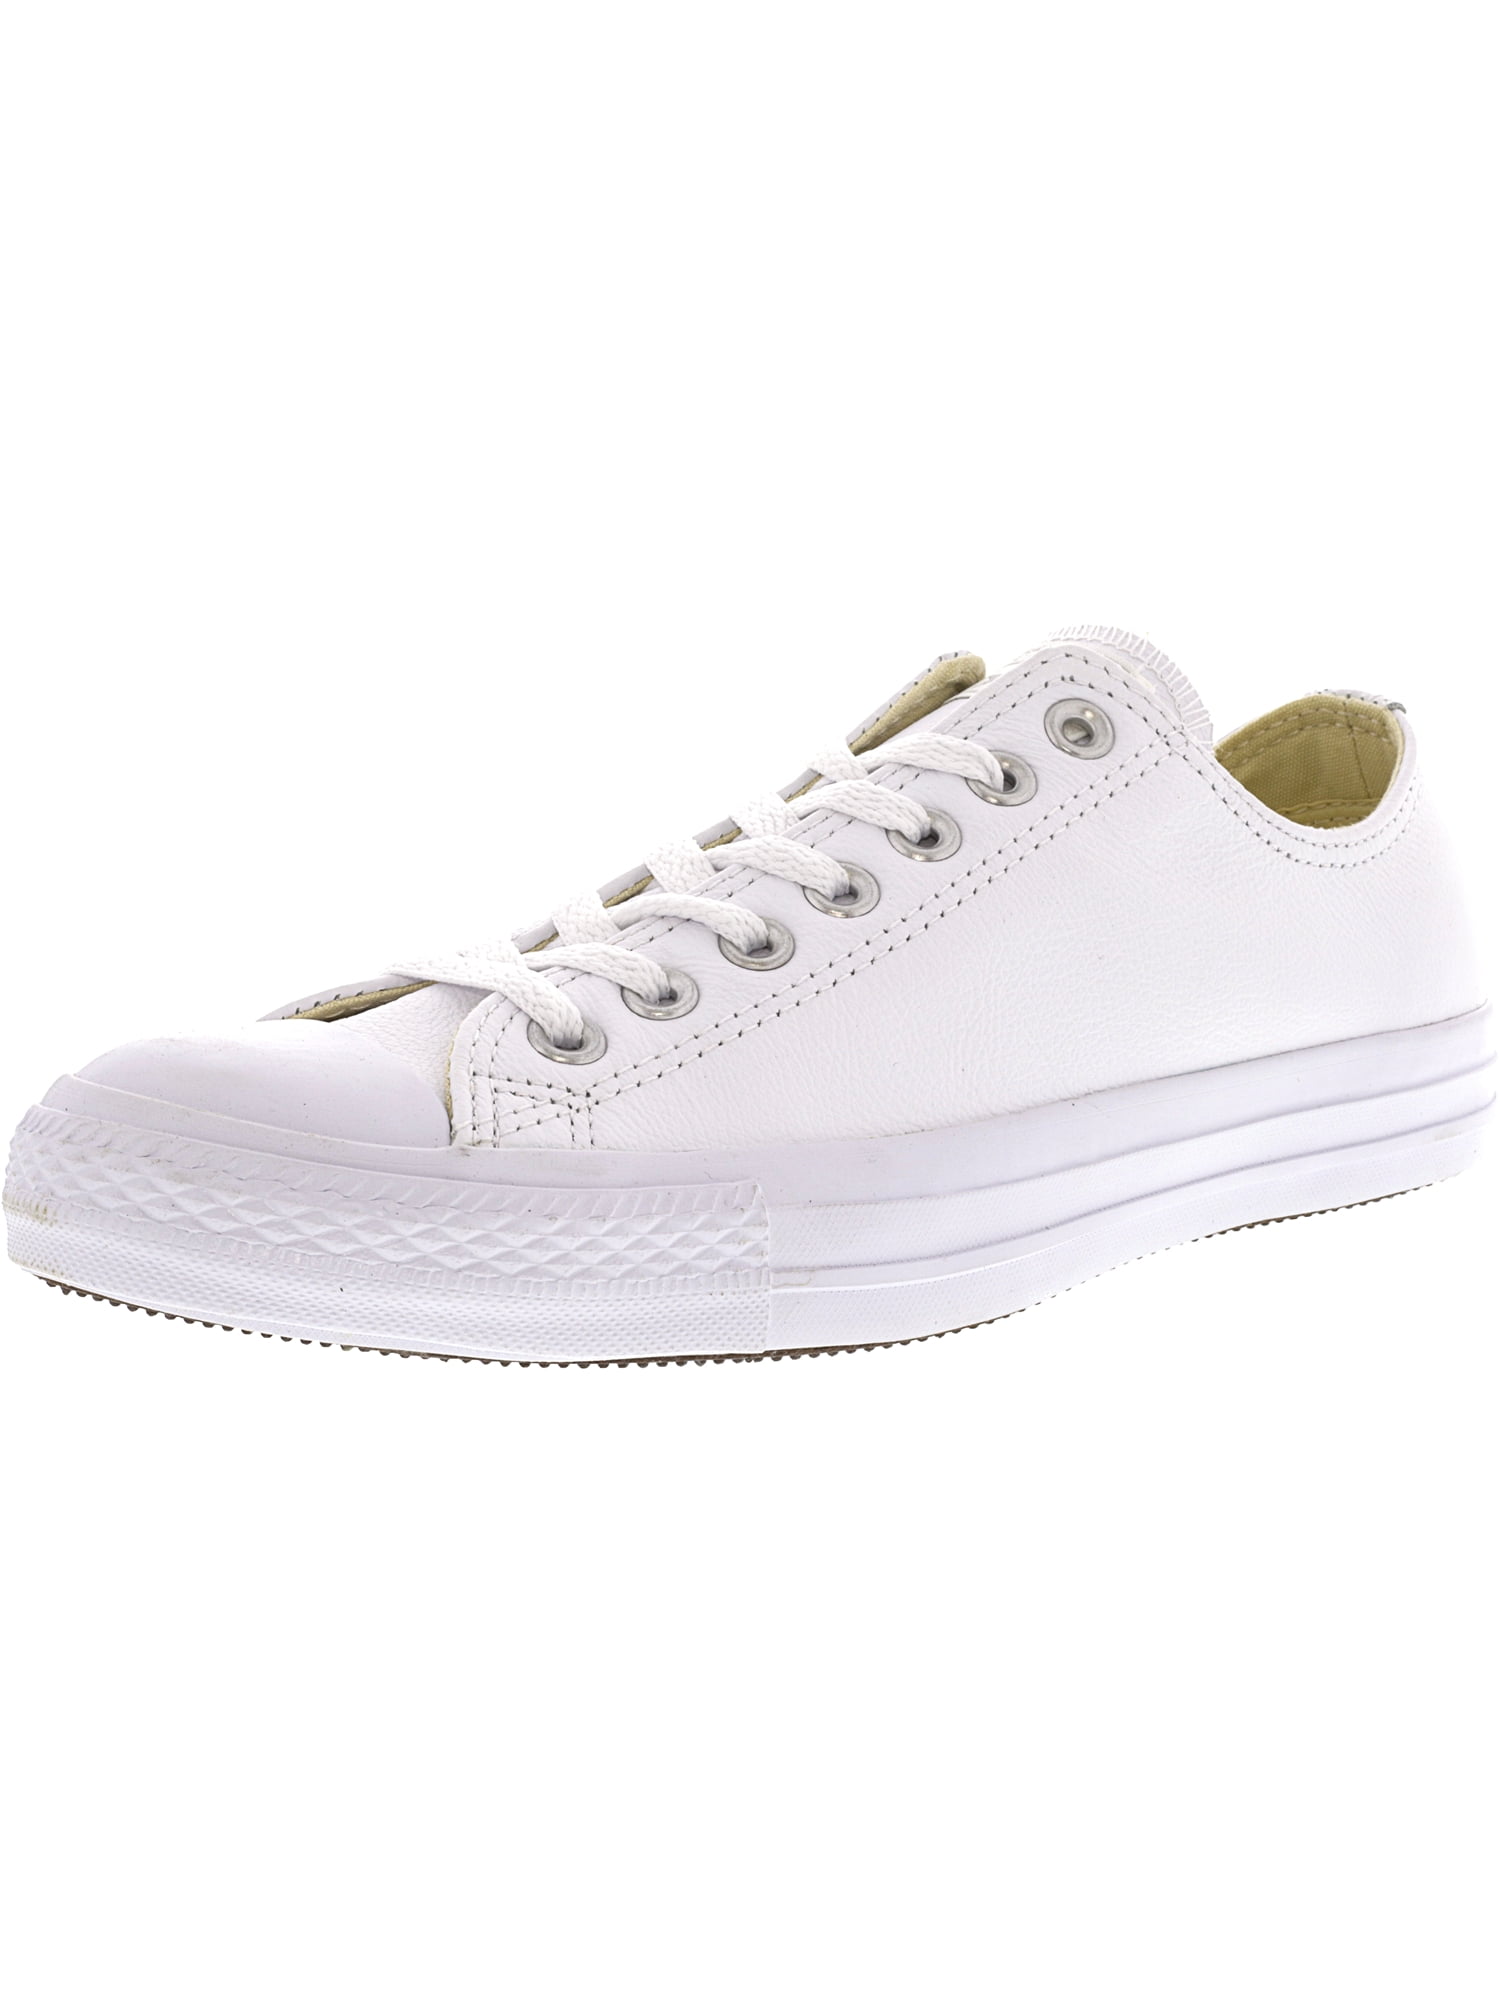 Jeg har en engelskundervisning anden pustes op Converse Chuck Taylor All Star Lea Ox White Monochrome Ankle-High Leather  Fashion Sneaker - 10.5M / 8.5M - Walmart.com